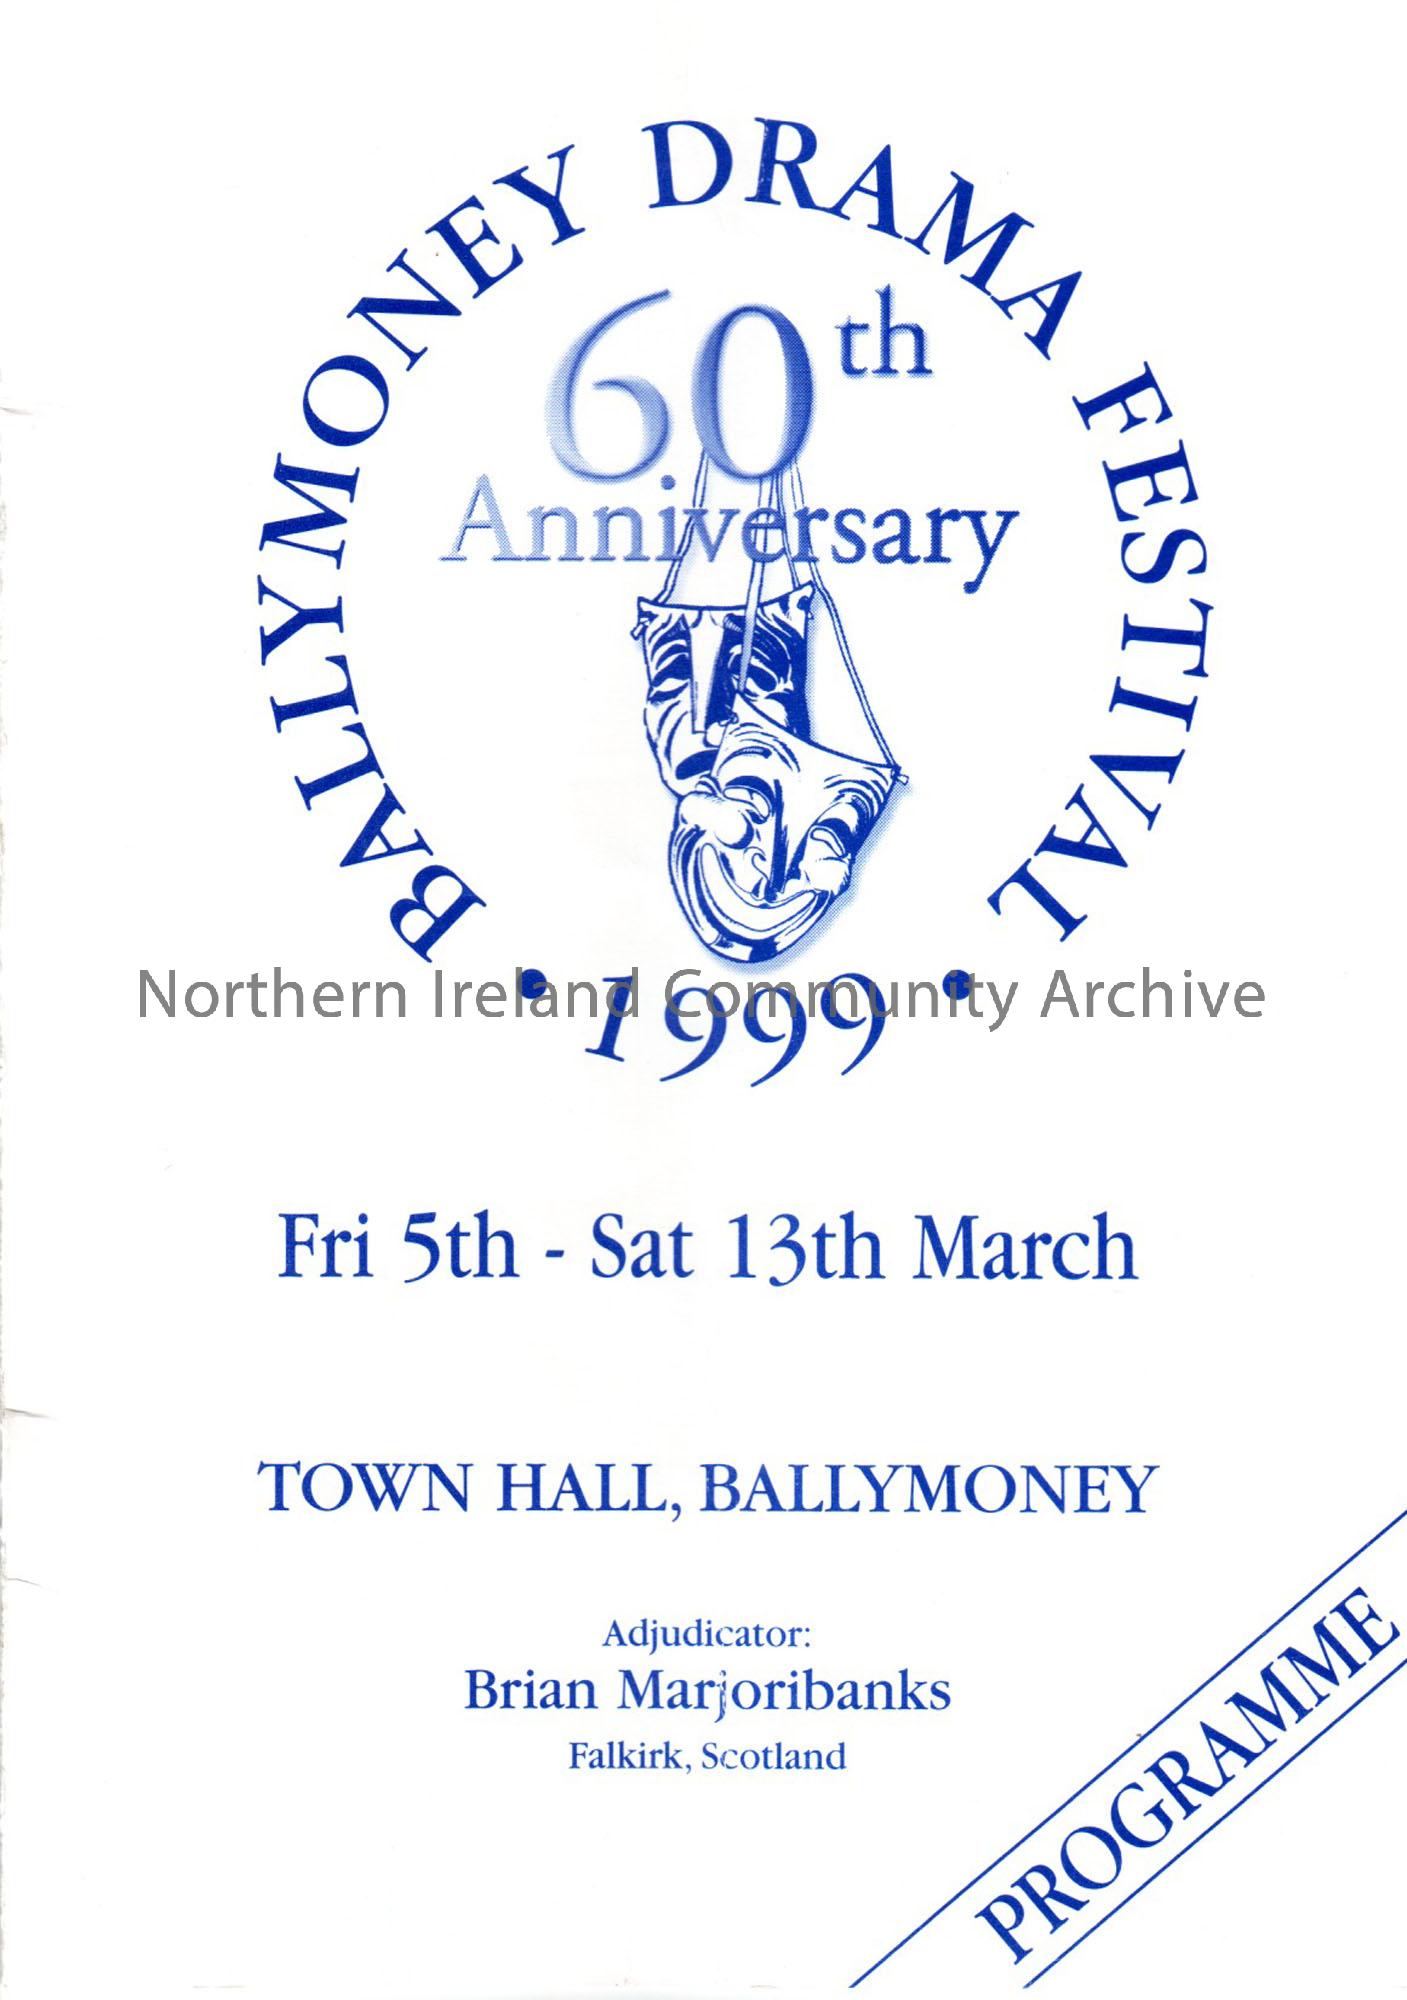 Programme of 60th Anniversary Ballymoney Drama Festival,1999 5th to 13th March